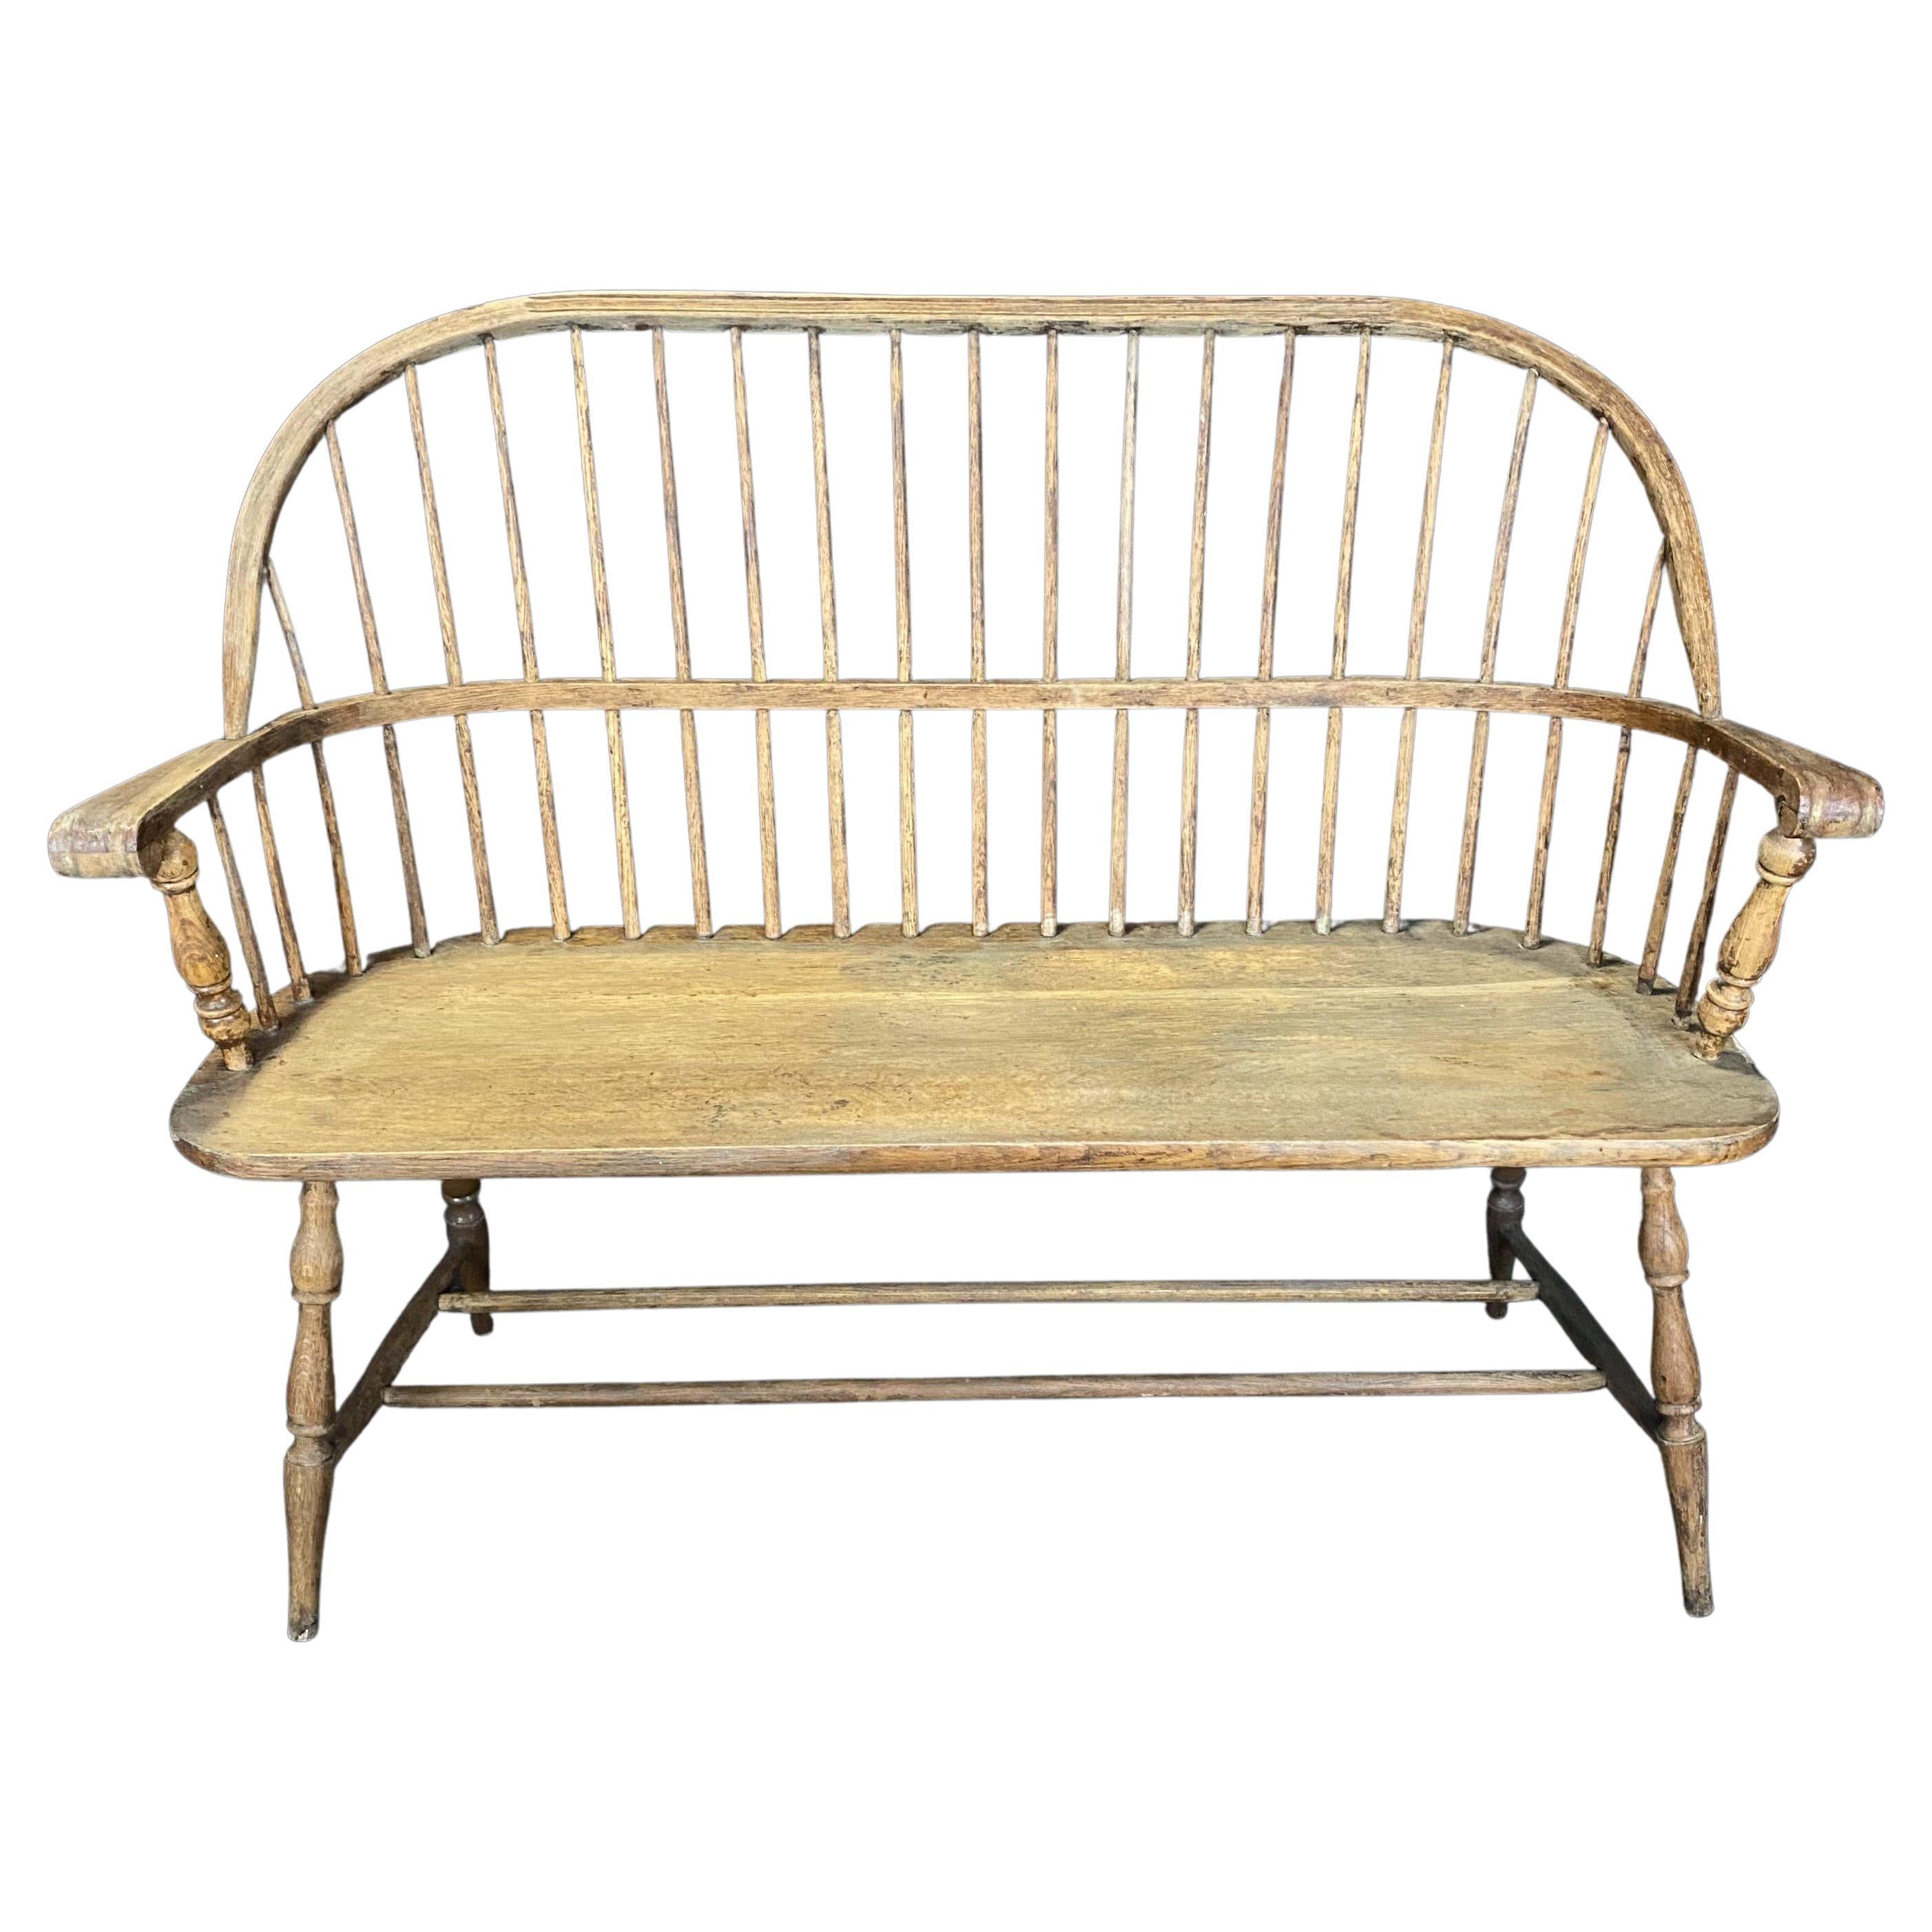 Classic Original Early Plank Seat Windsor Spindle Back Hoop Bench or Settee